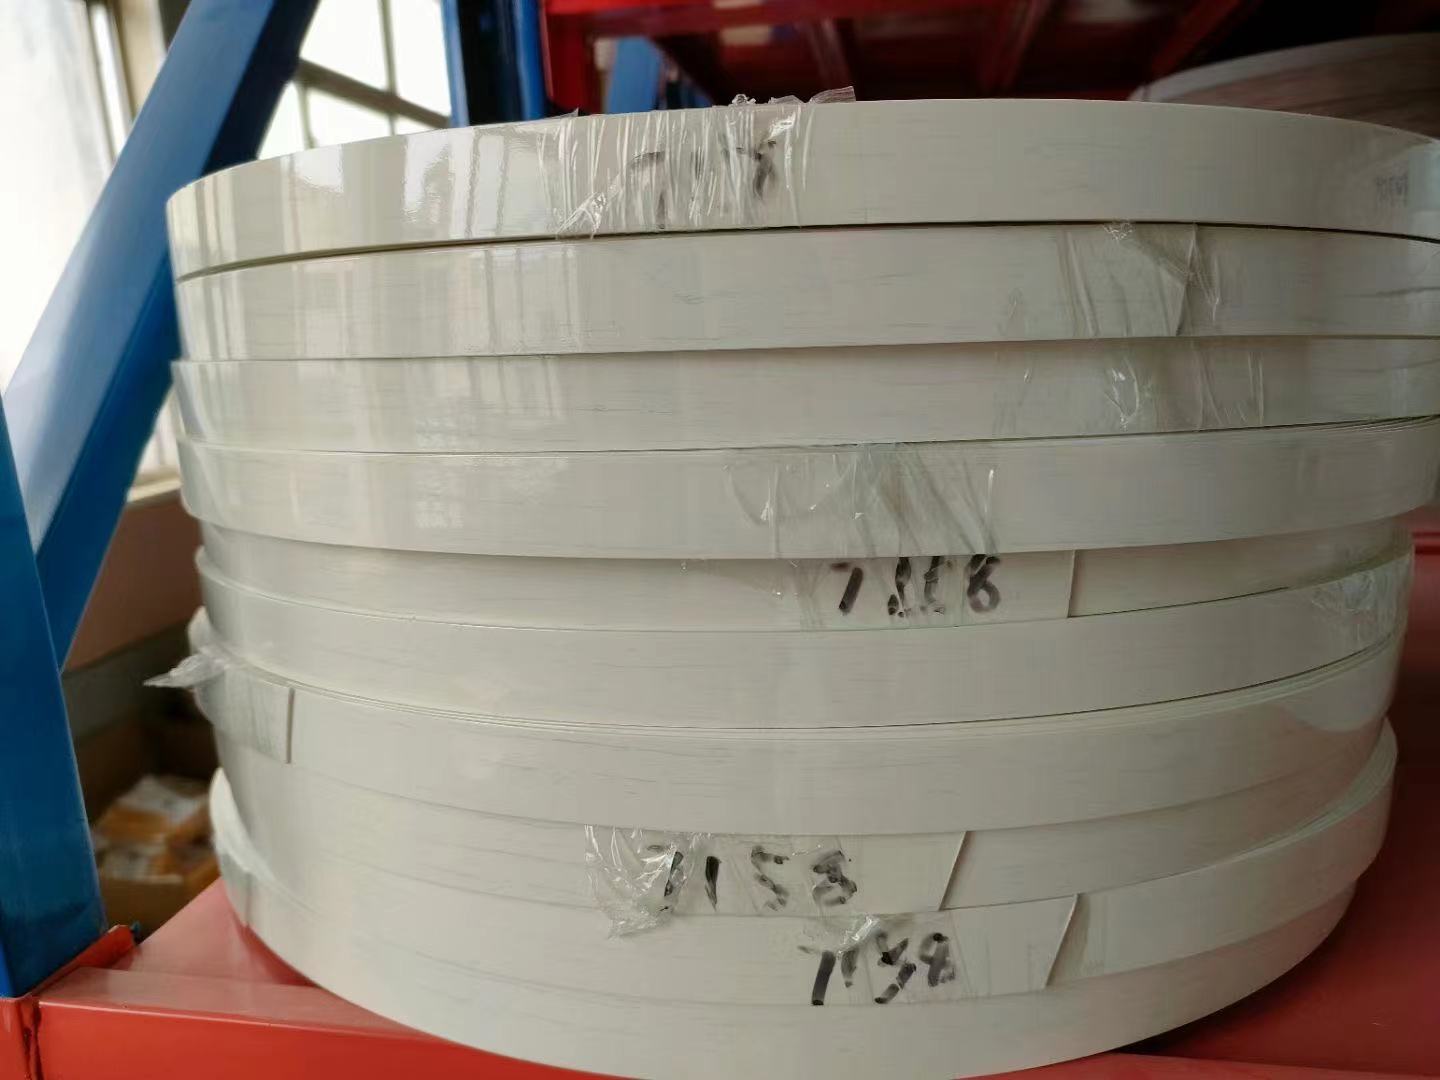 China Factory Wholesale Solid Color PVC/ABS Edge Banding, Used for Plastic Board Cabinets, Cabinets, Kitchen Decoration